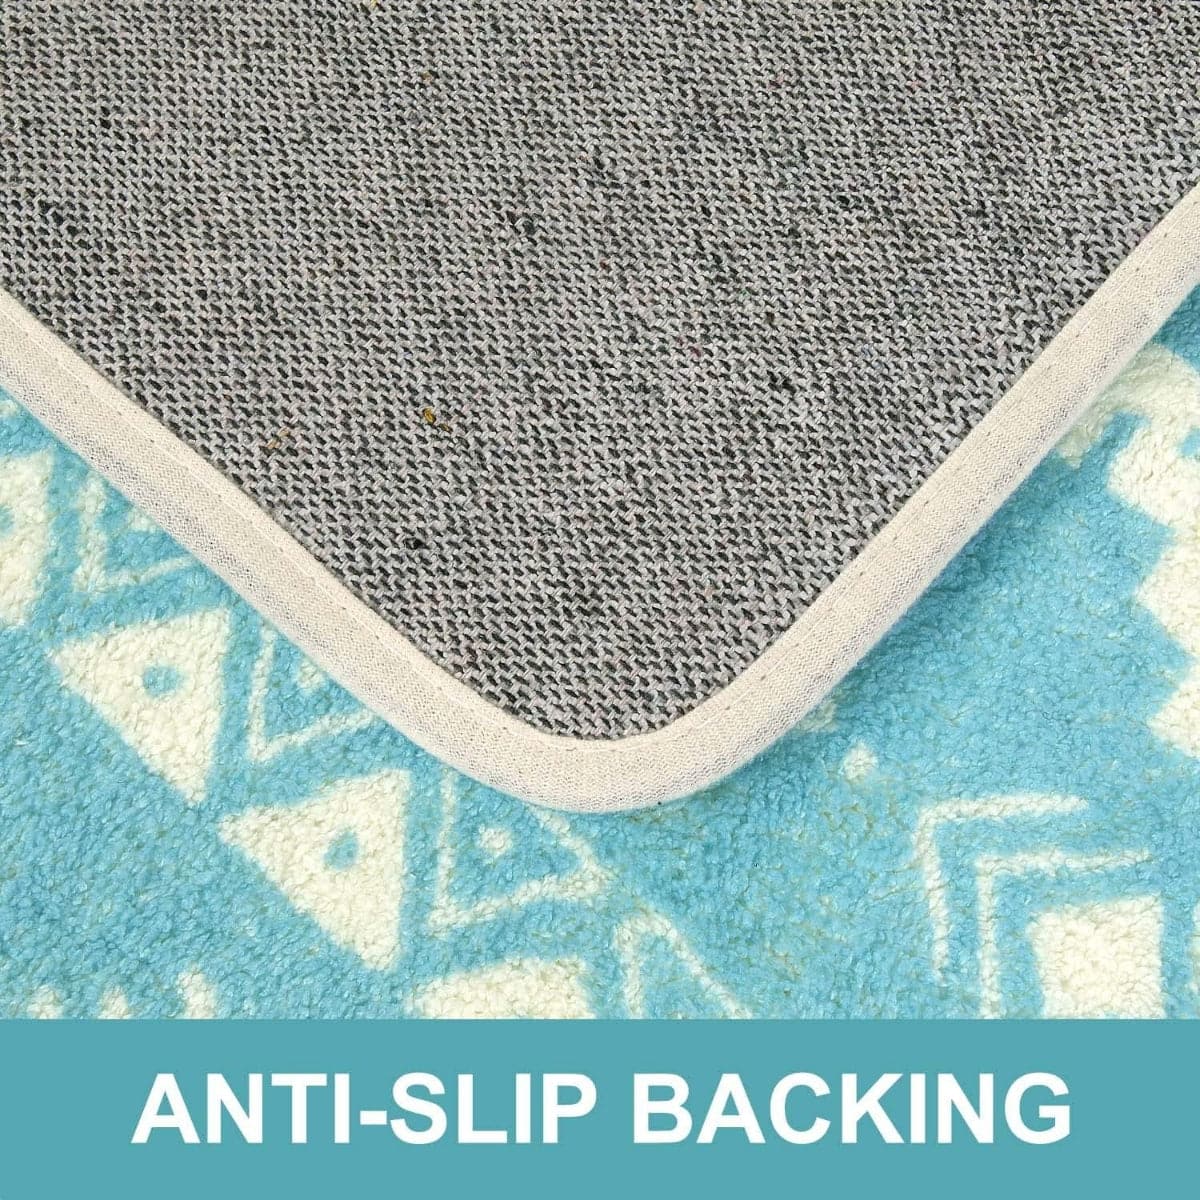 Gray/White Washable Geometric Indoor Doormats with Non Slip Backing